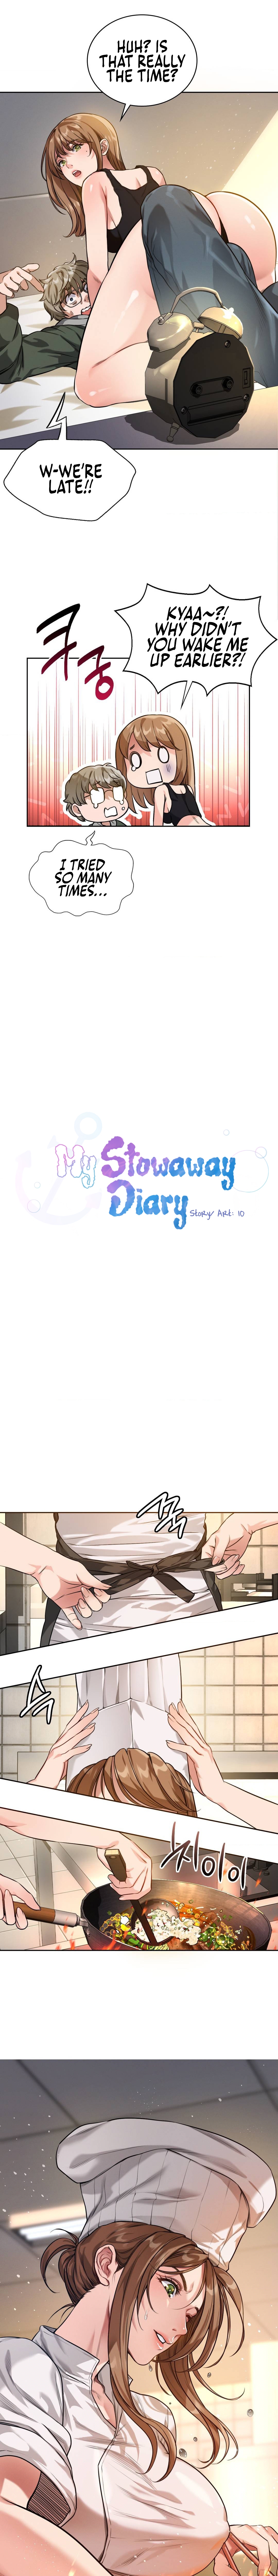 My Stowaway Diary - Chapter 1 Page 9